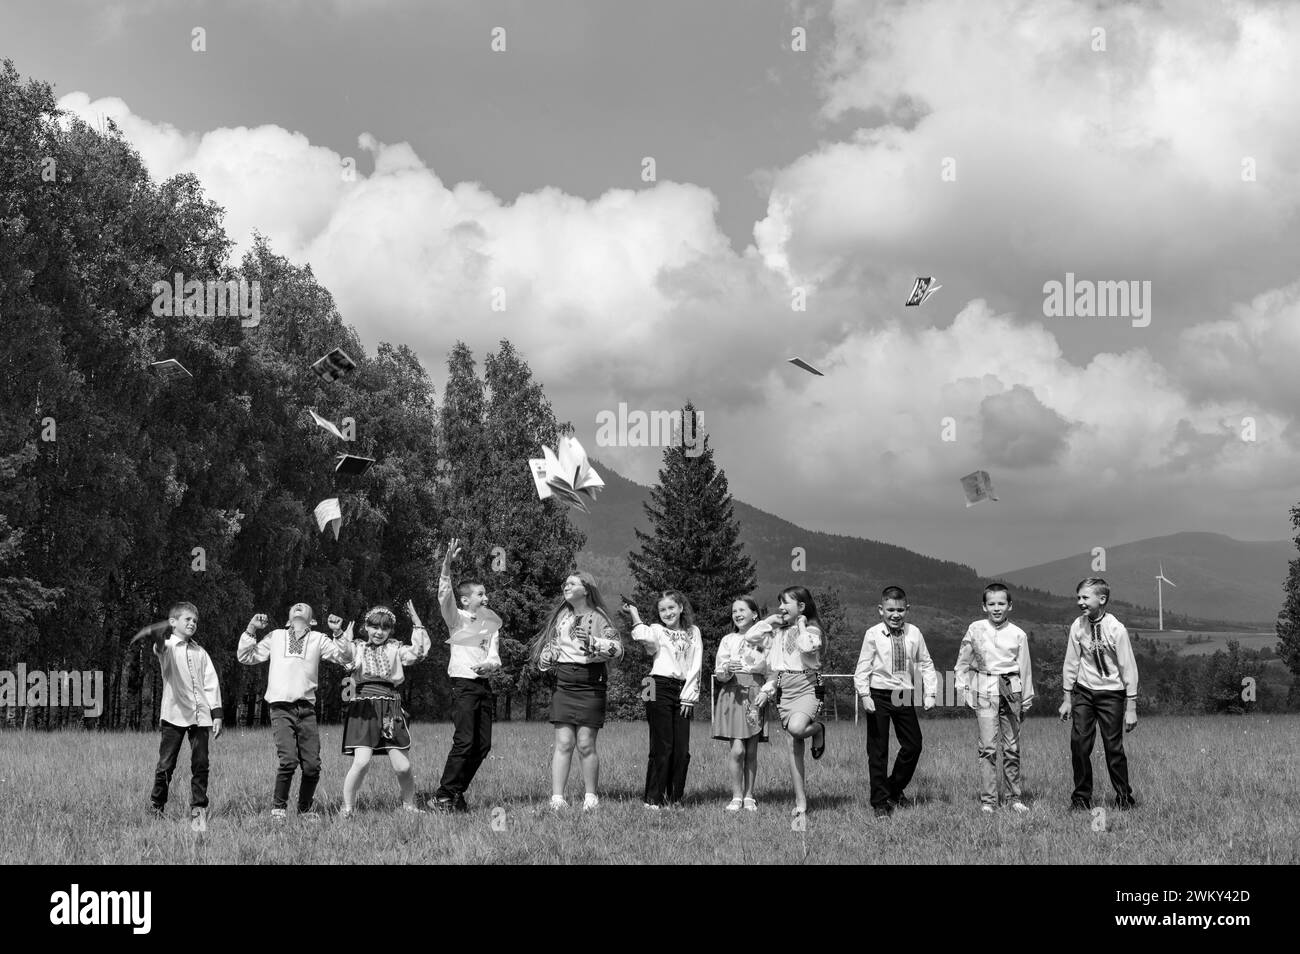 Ivano-Frankivsk, Ukraine May 26, 2023: a group of young schoolchildren throw their notebooks up, mountains and forest in the background. Stock Photo